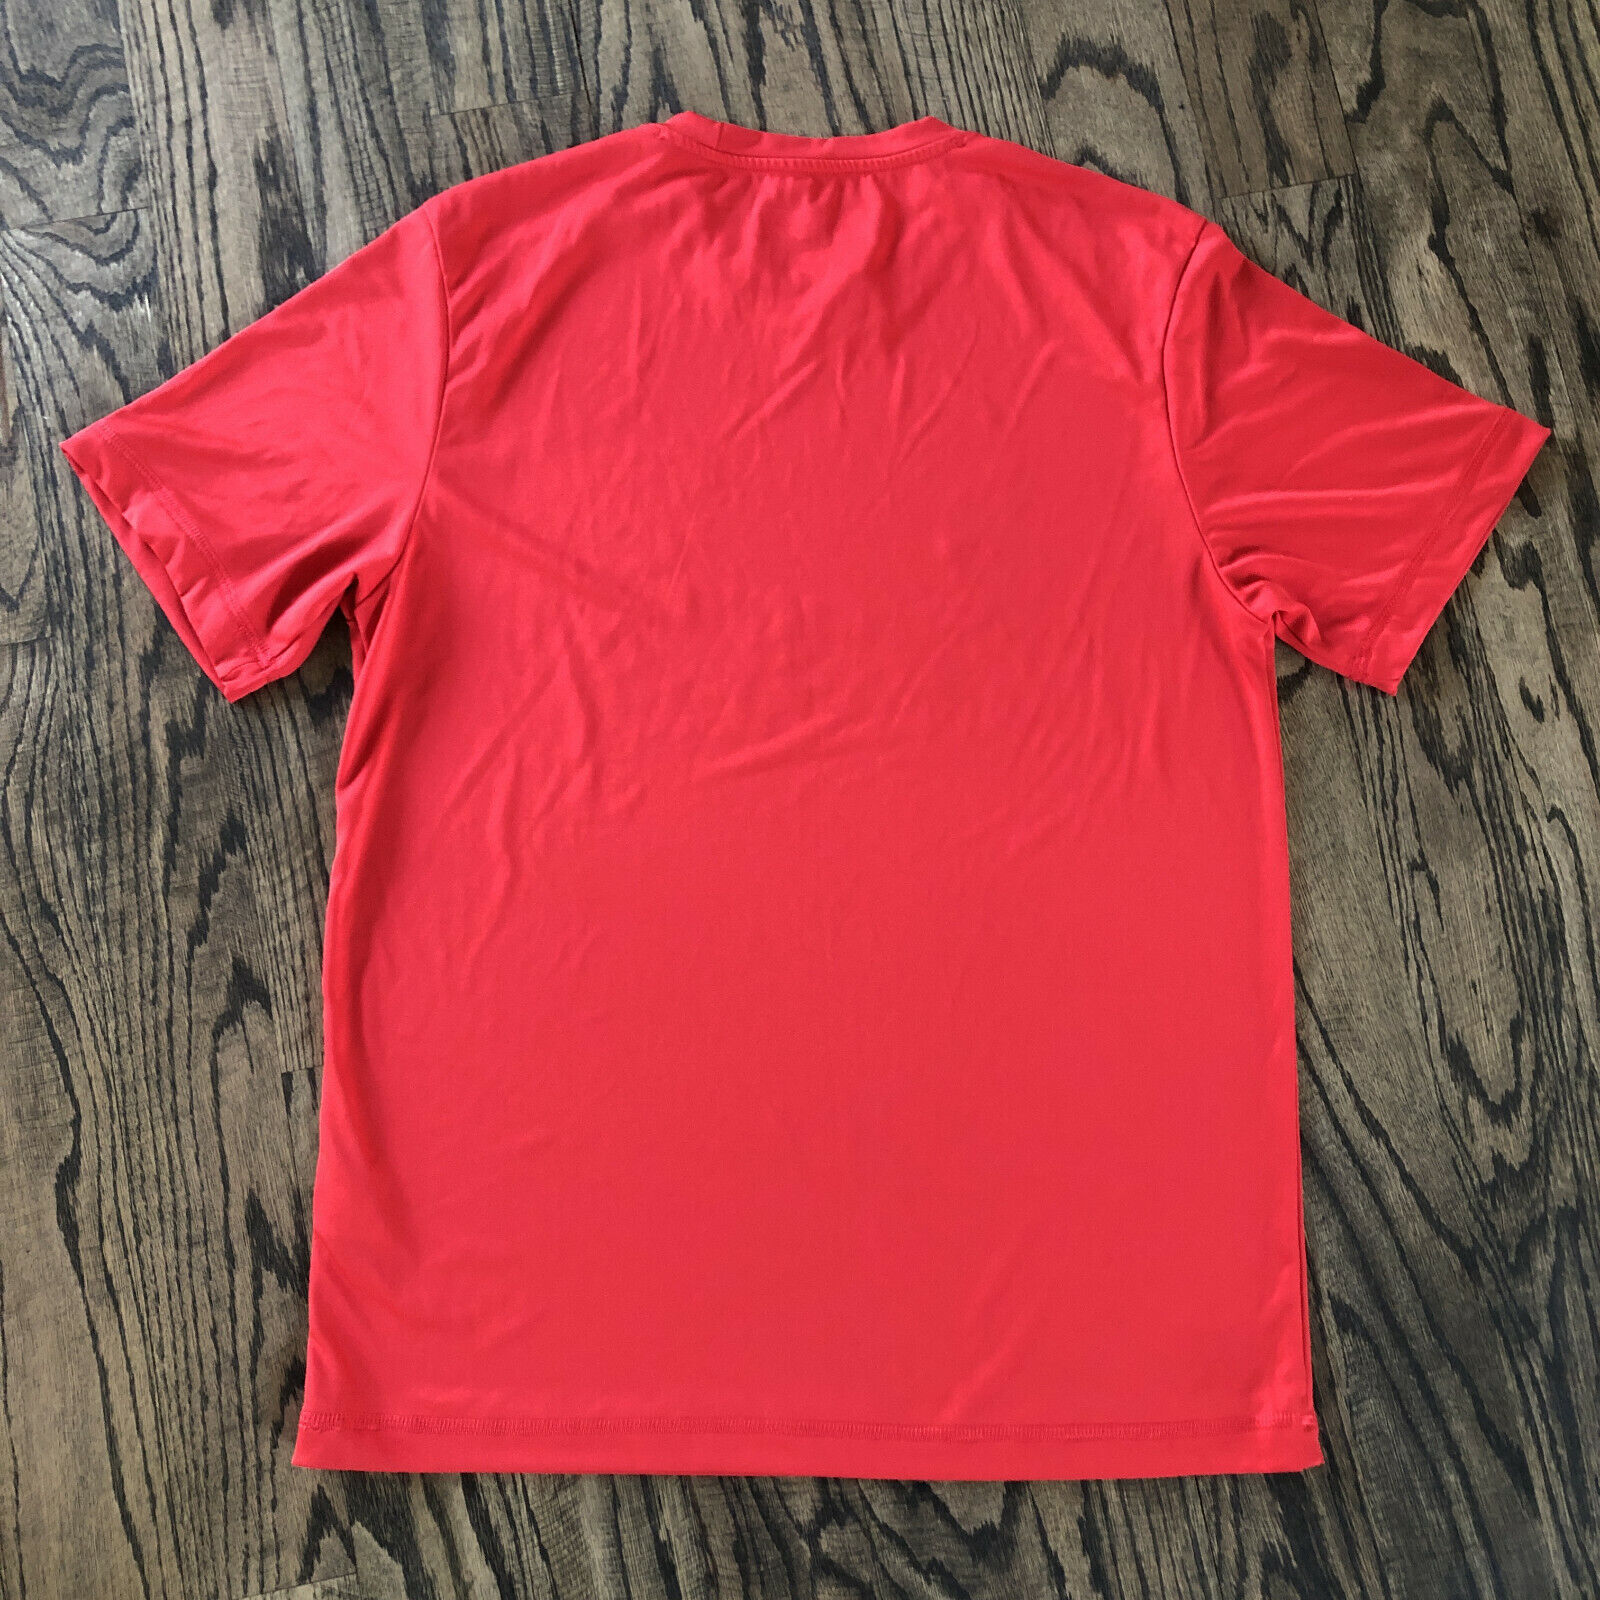  St. Louis Cardinals Adult Evolution Color T-Shirt (Small, Red)  : Sports & Outdoors